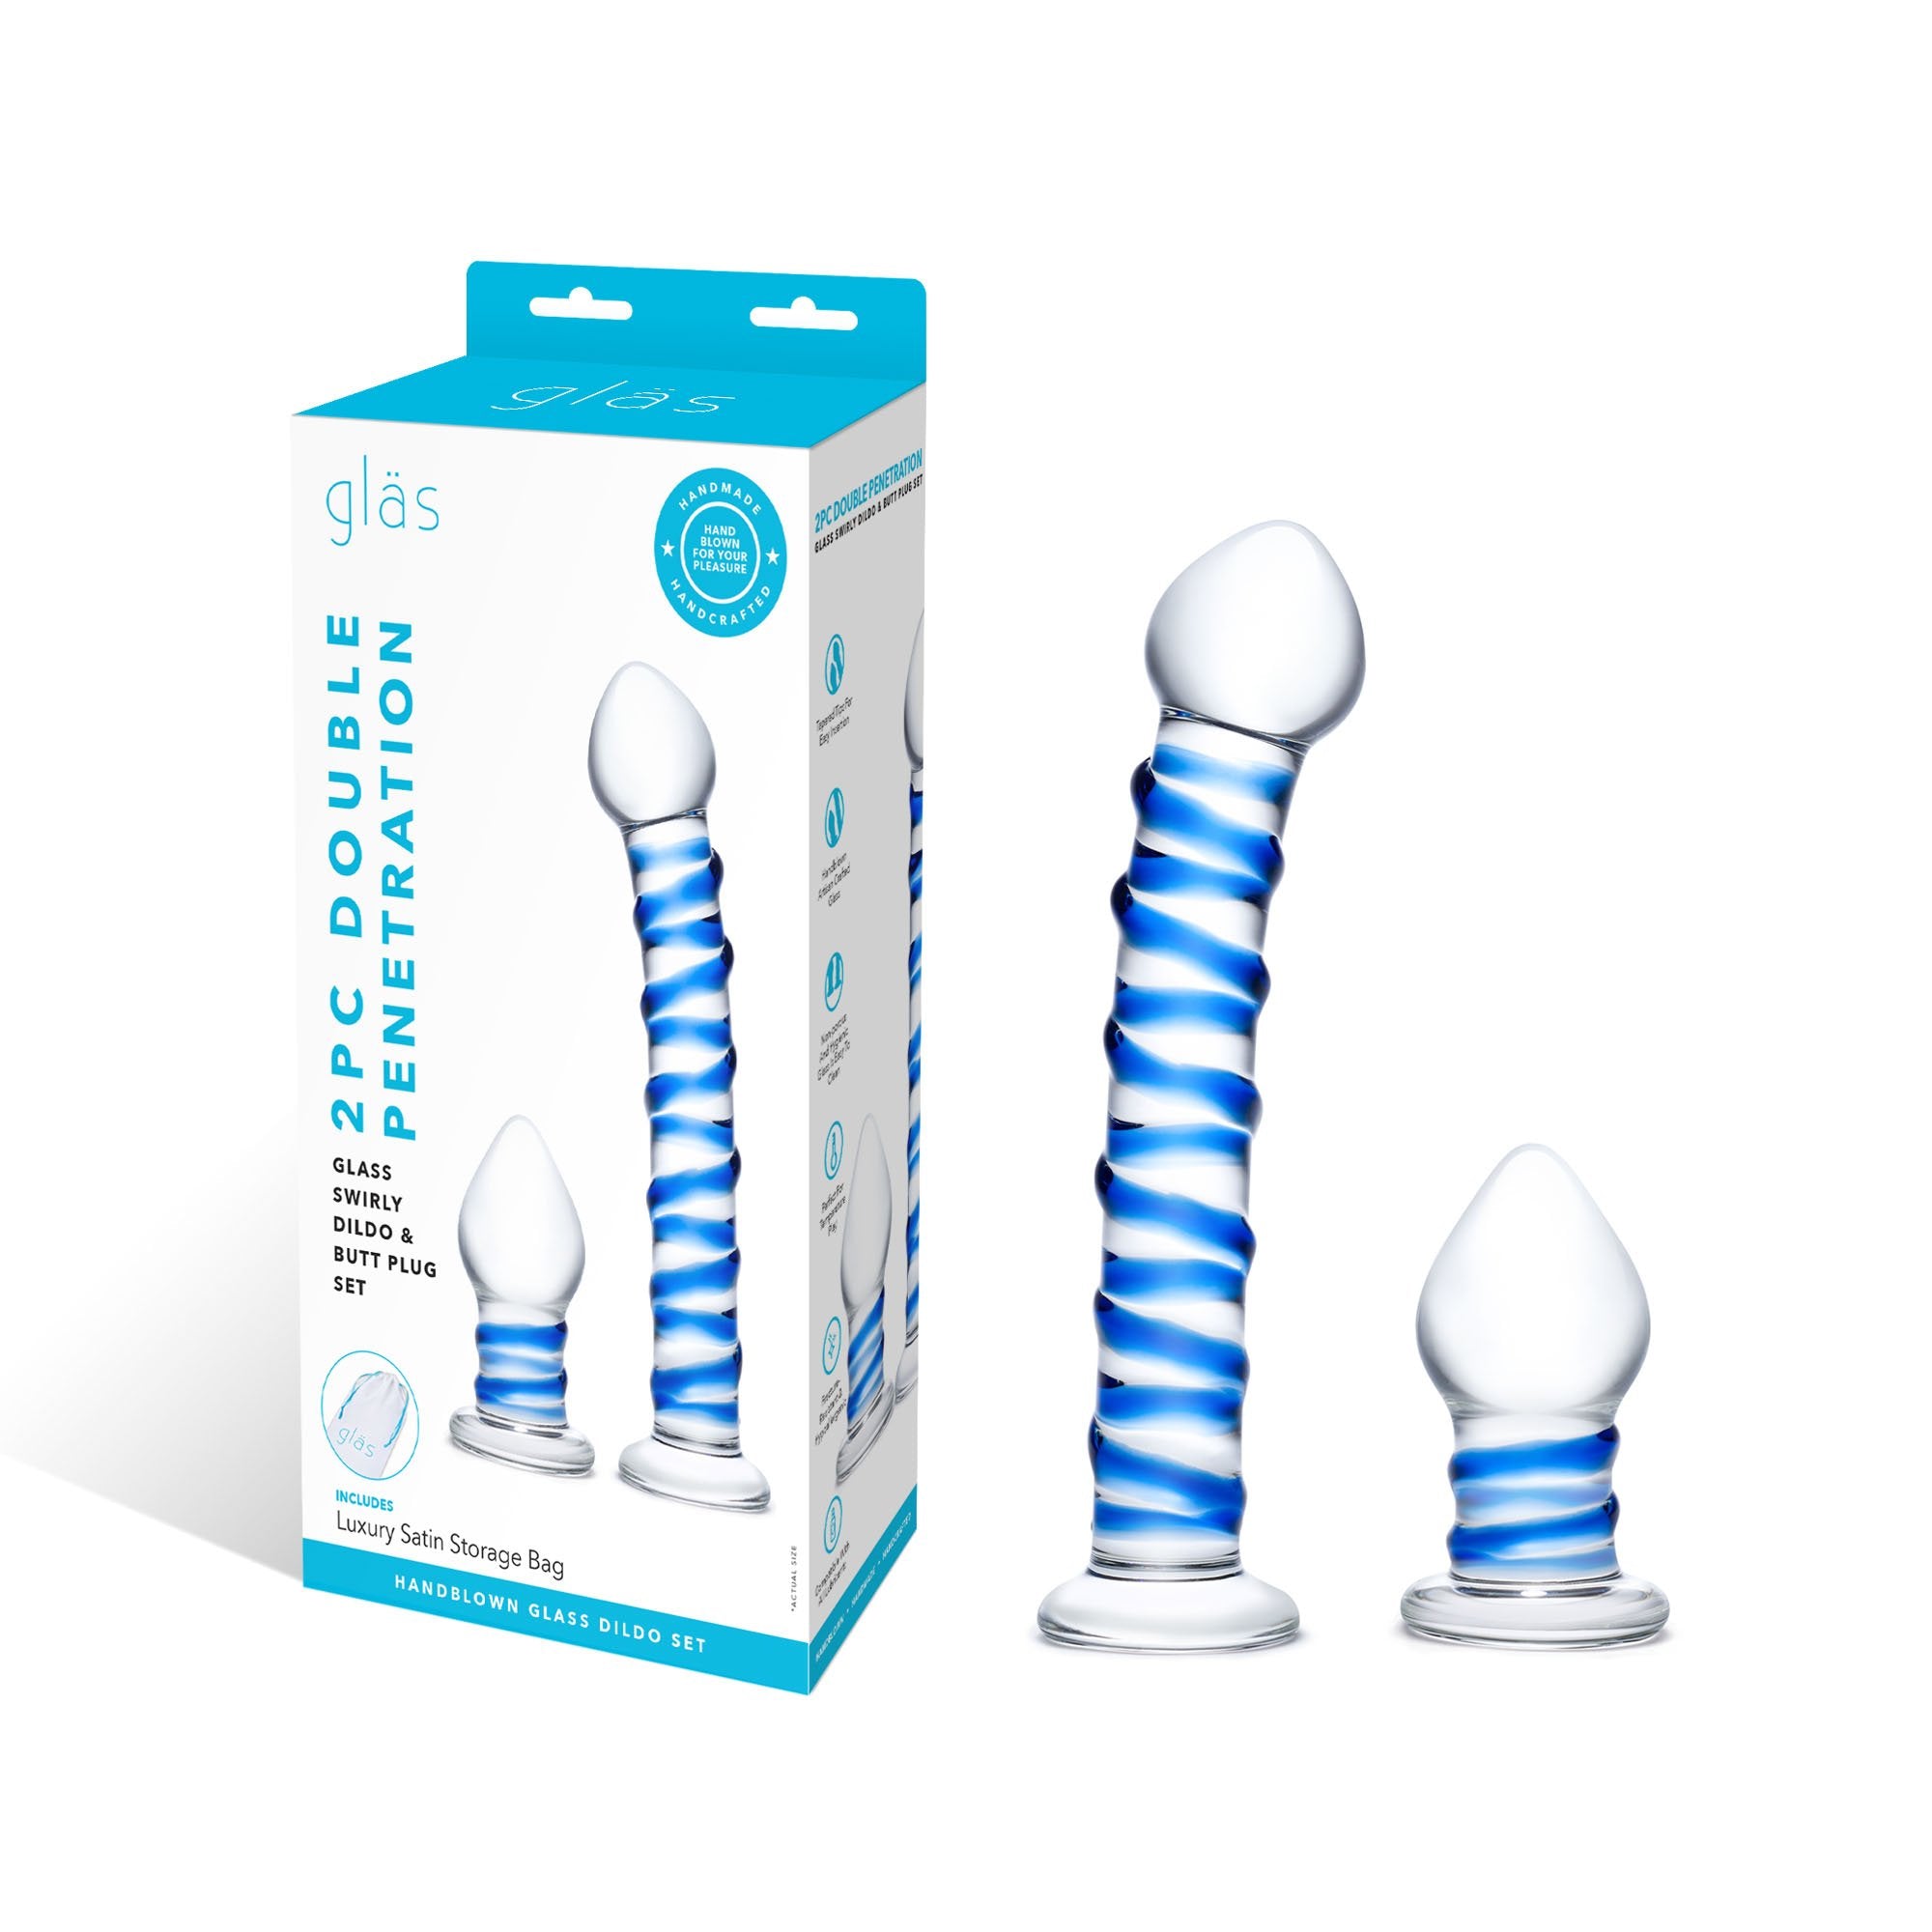 Packaging of the Double Penetration Glass Swirly Dildo & Butt Plug Set